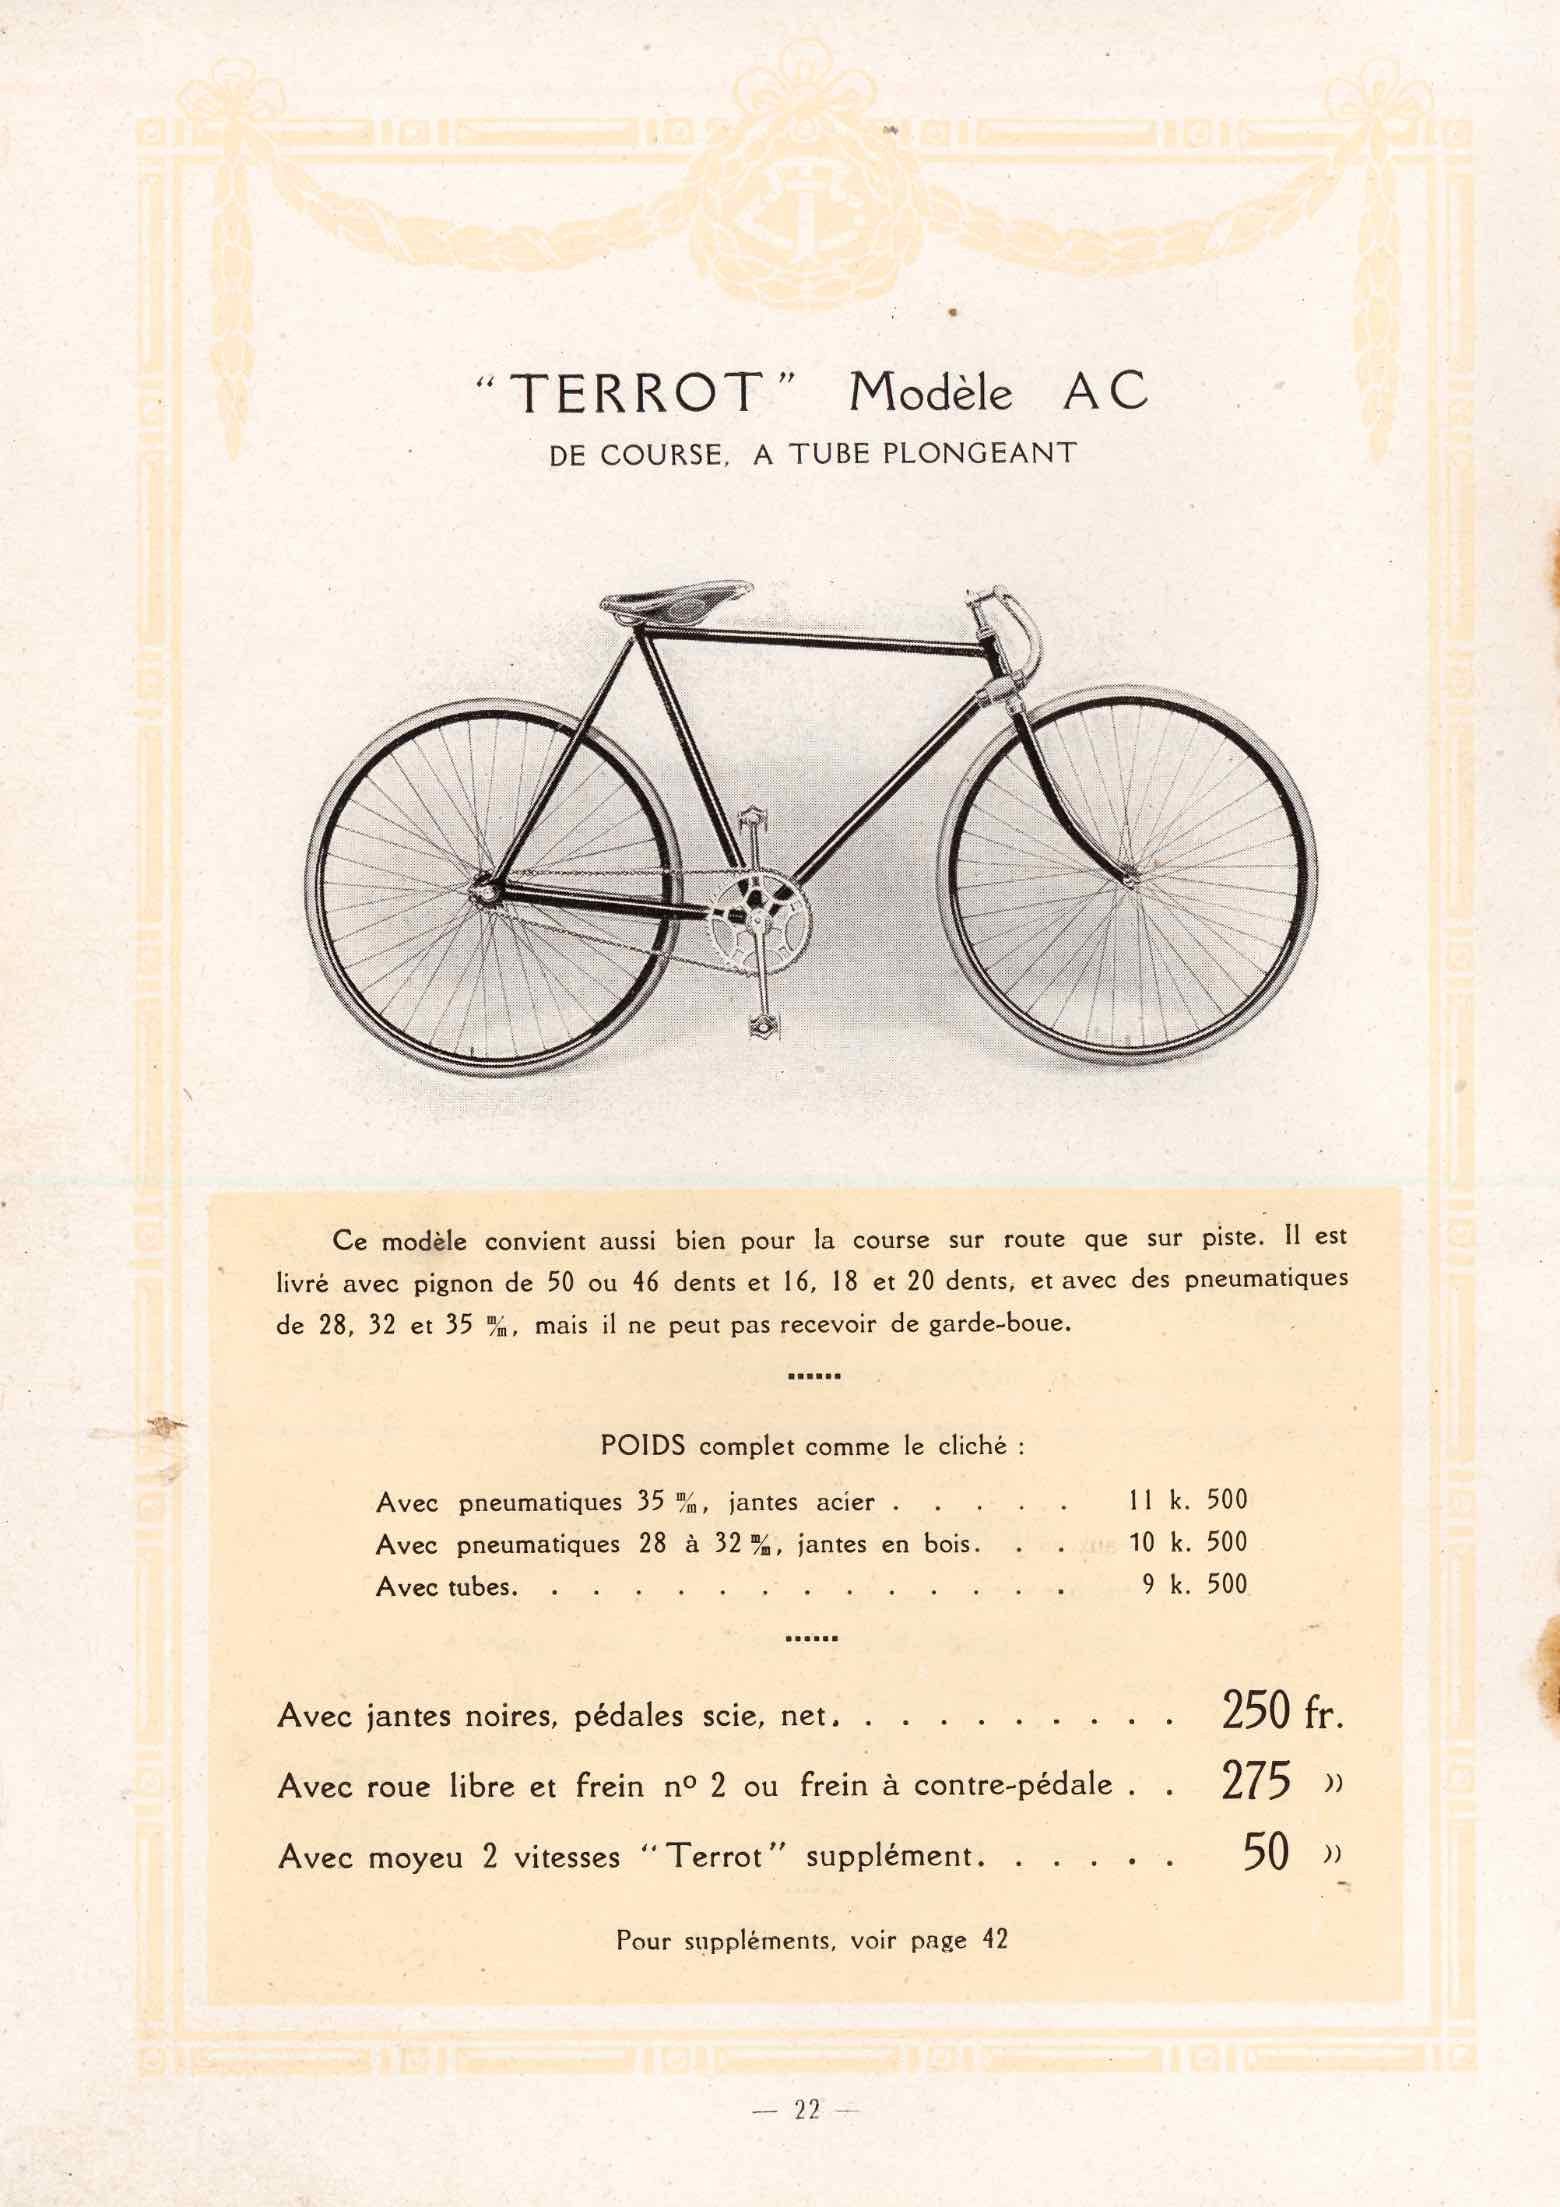 Terrot & Cie - Cycles Motorcyclettes Voiturettes 1914 page 22 main image